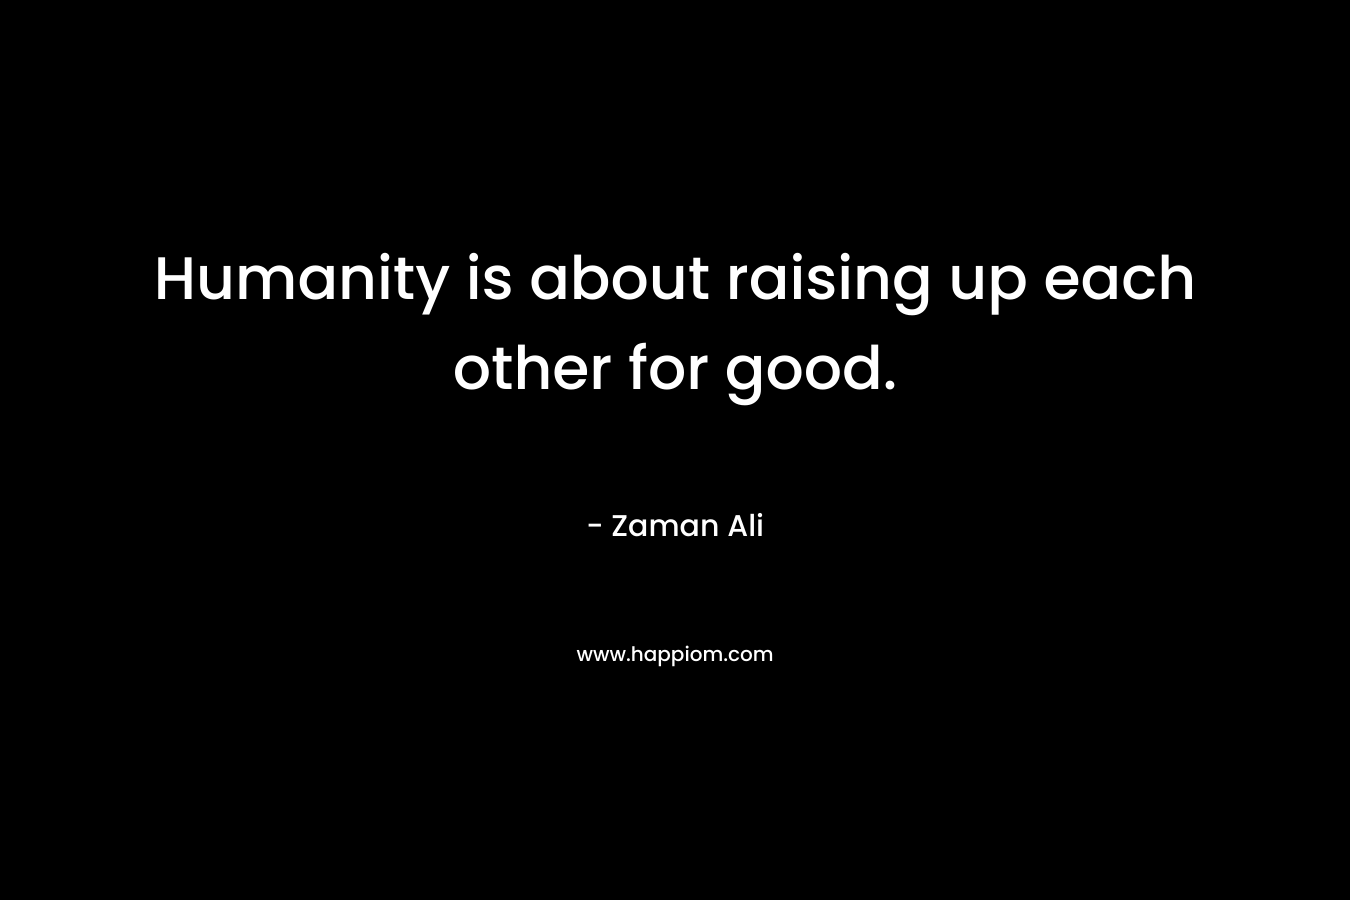 Humanity is about raising up each other for good.